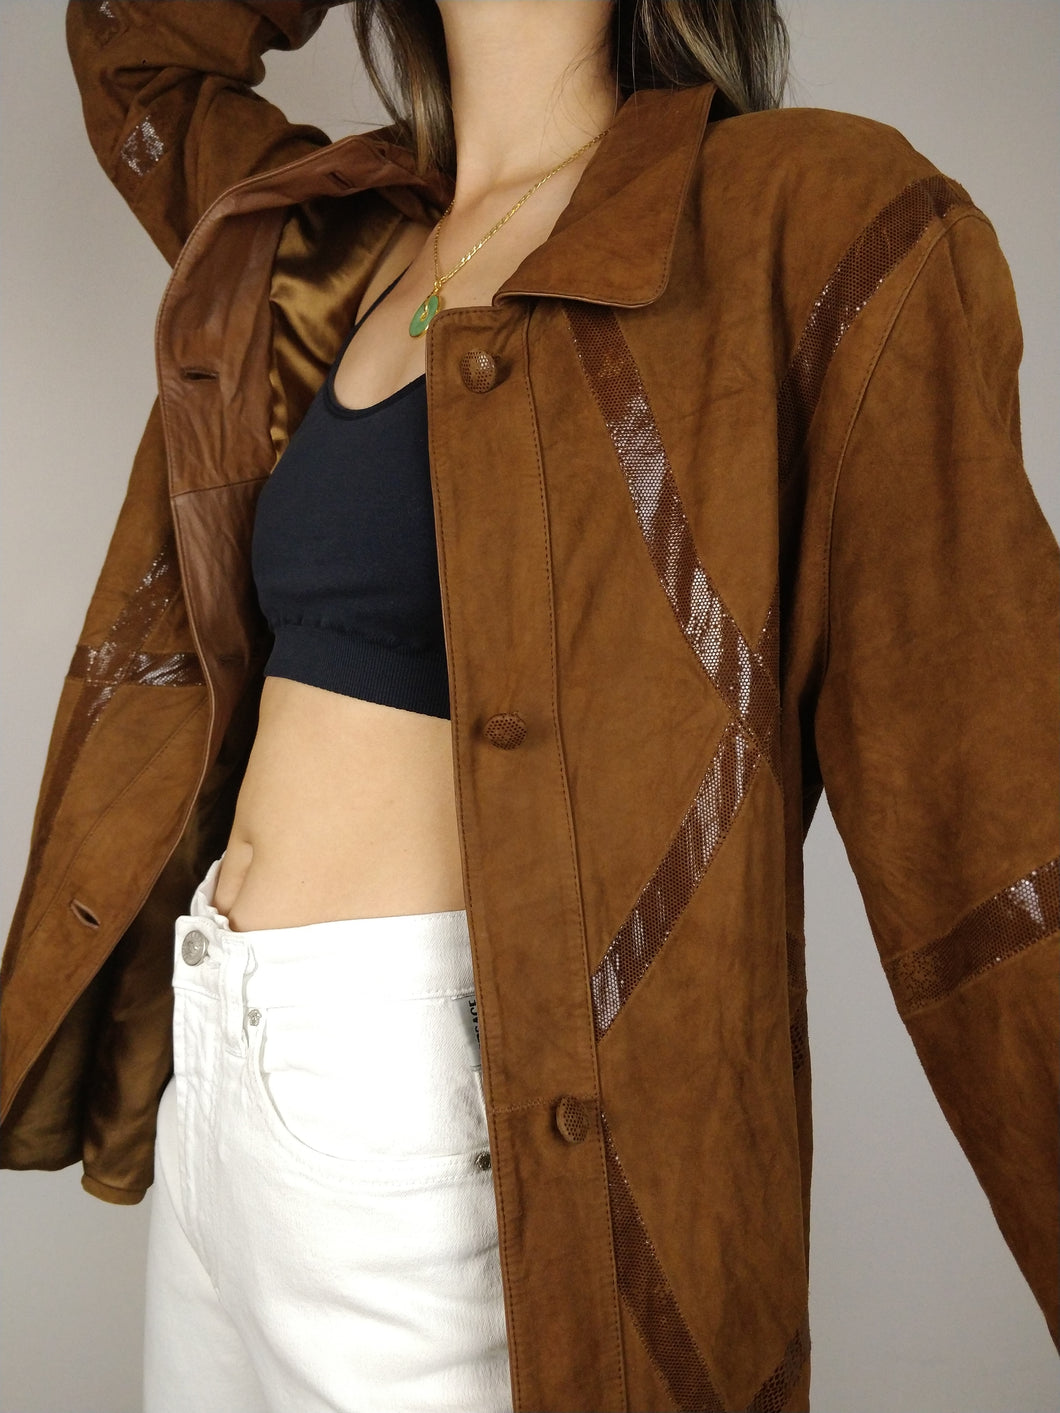 The Suede Lines | Vintage real suede leather jacket shiny line pattern coat brown S-M